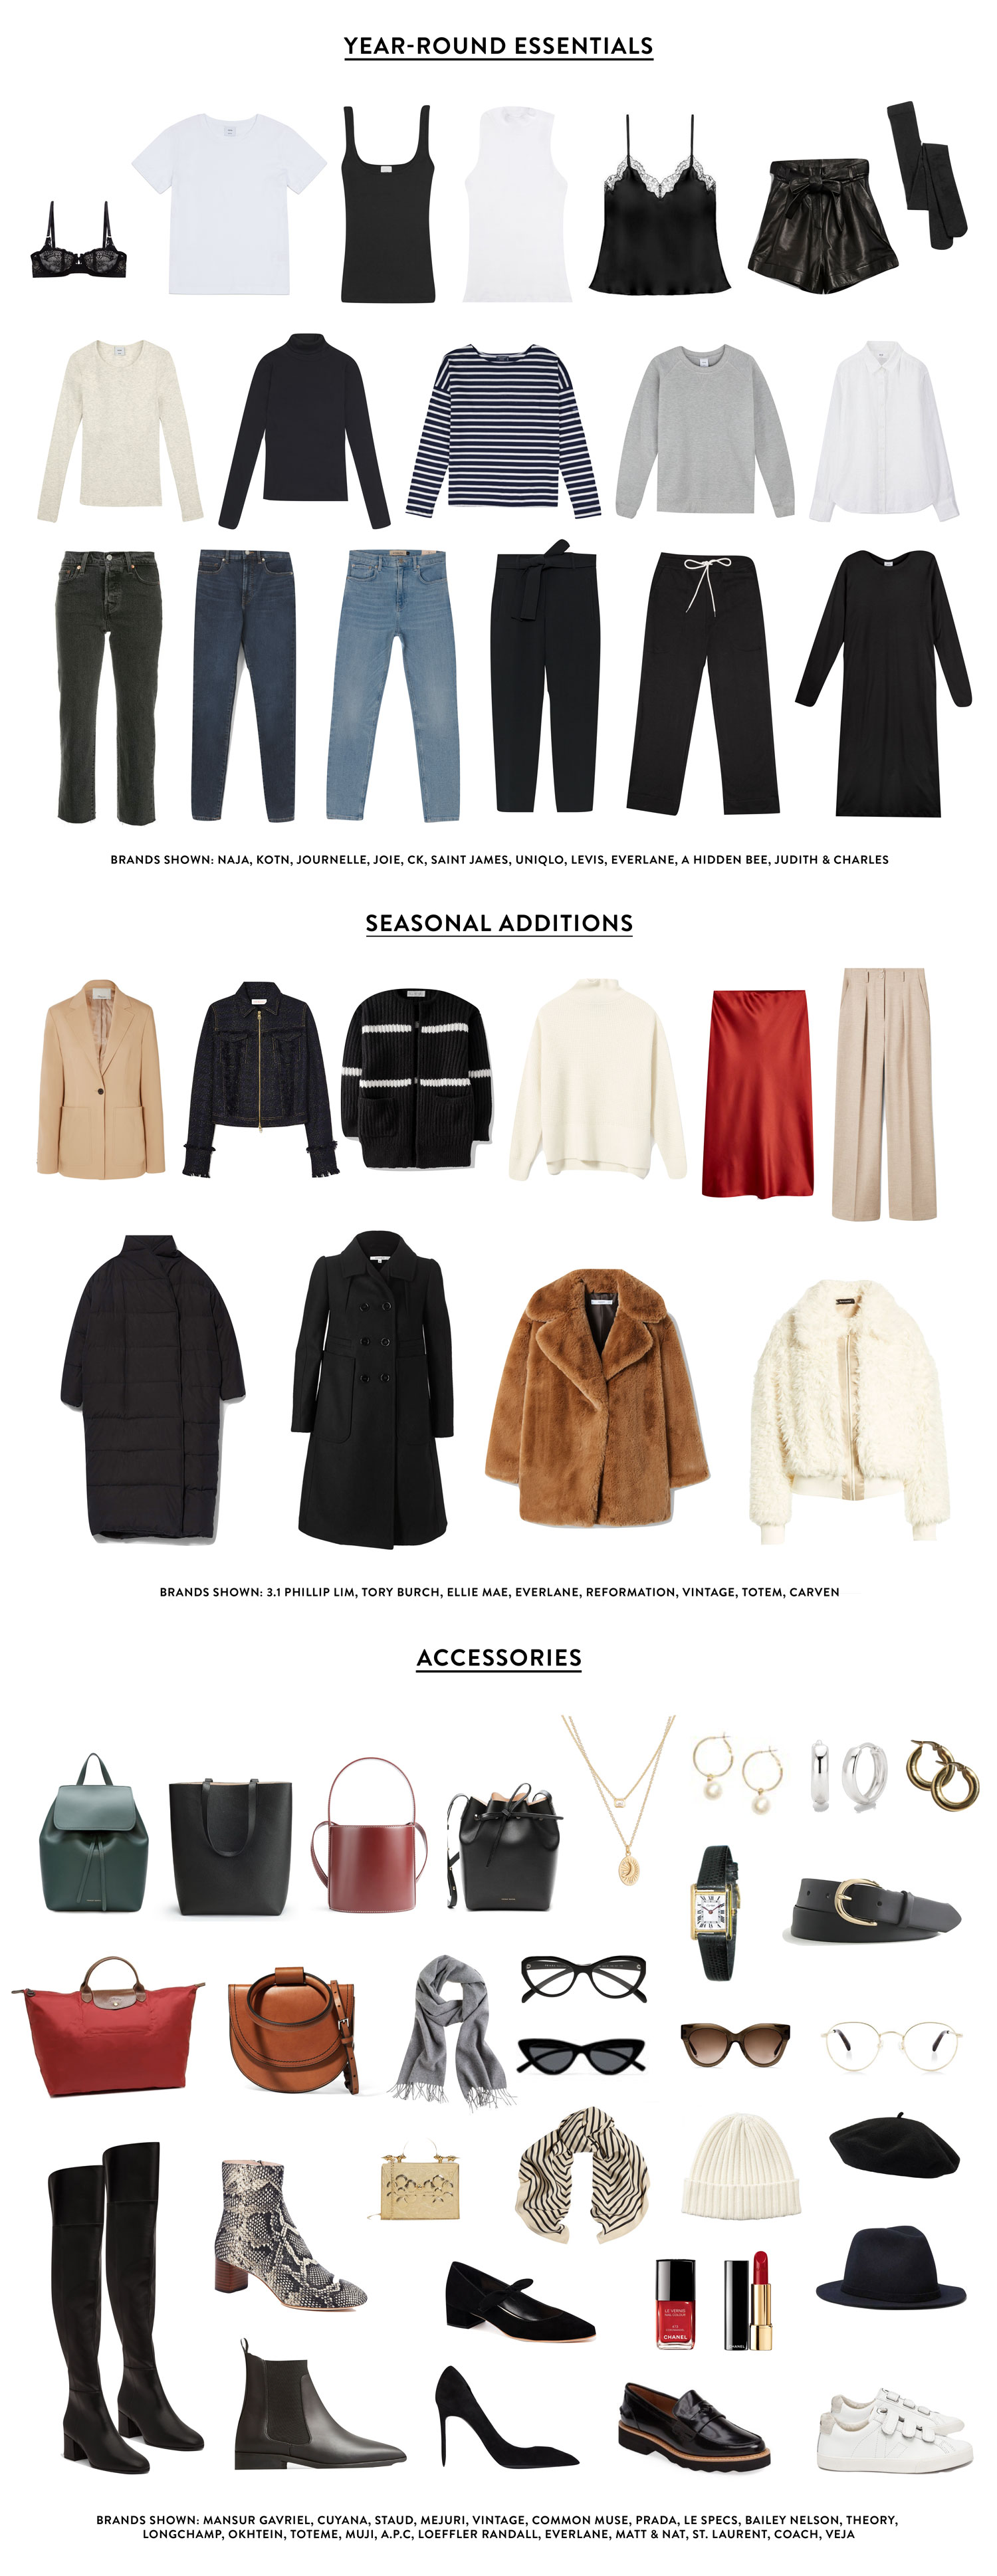 How to Build Your Capsule Wardrobe This Year | Yellow Co.